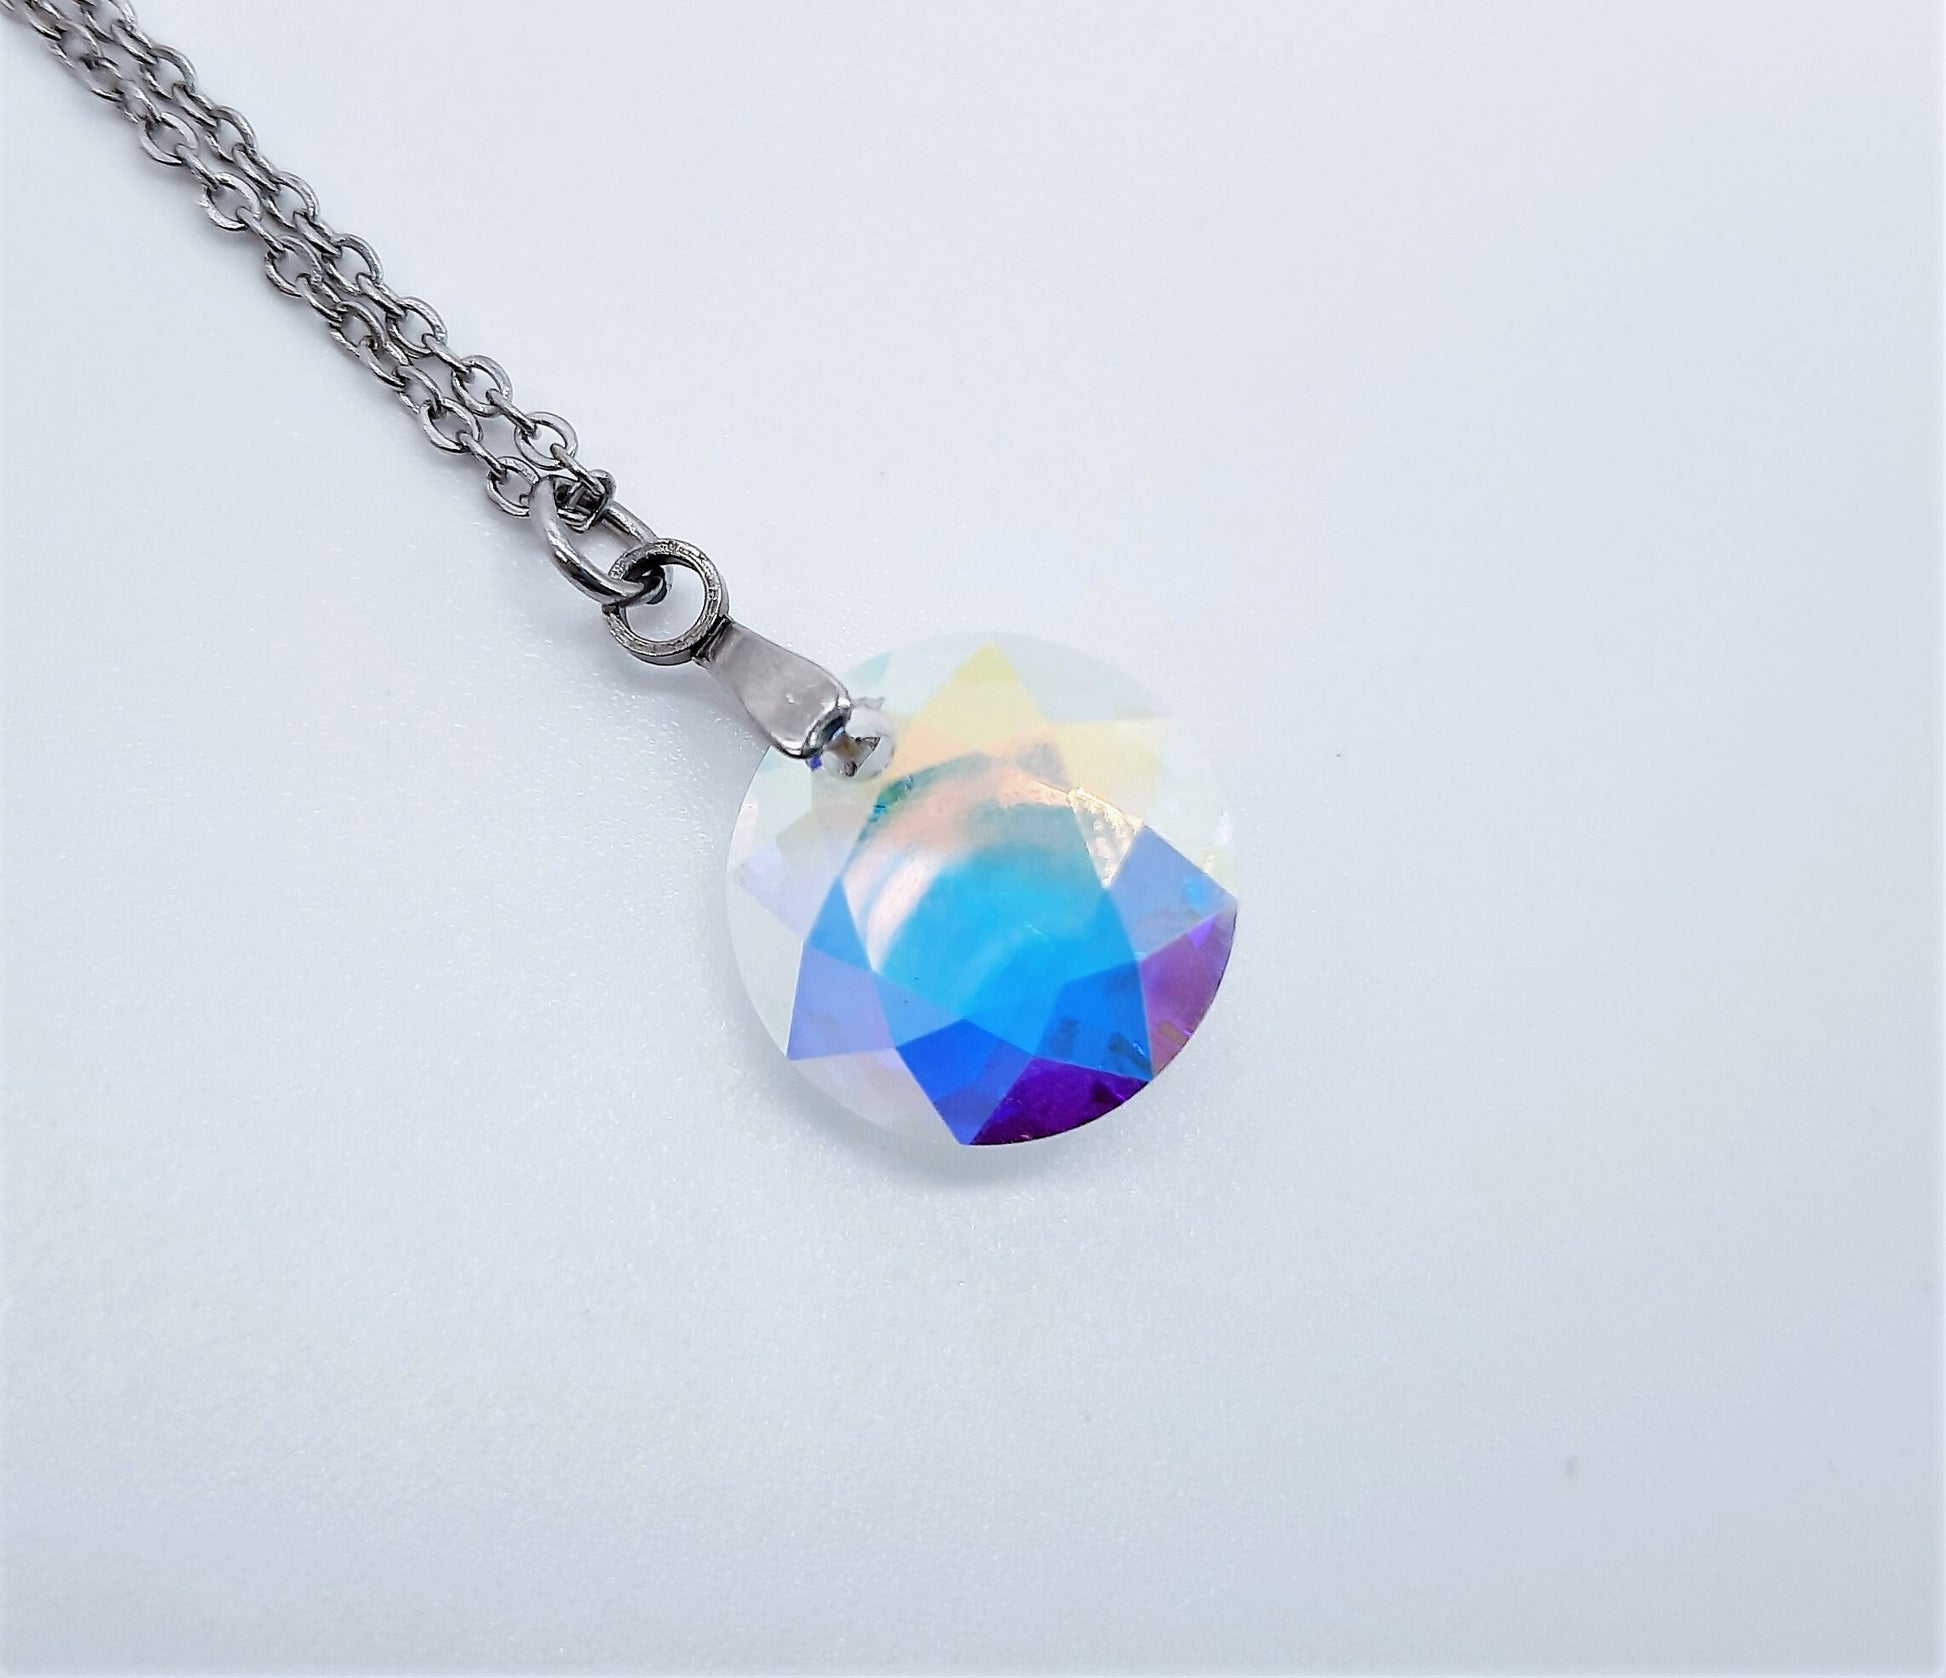 Invisible Necklace With White Crystal Pendant The Aurora